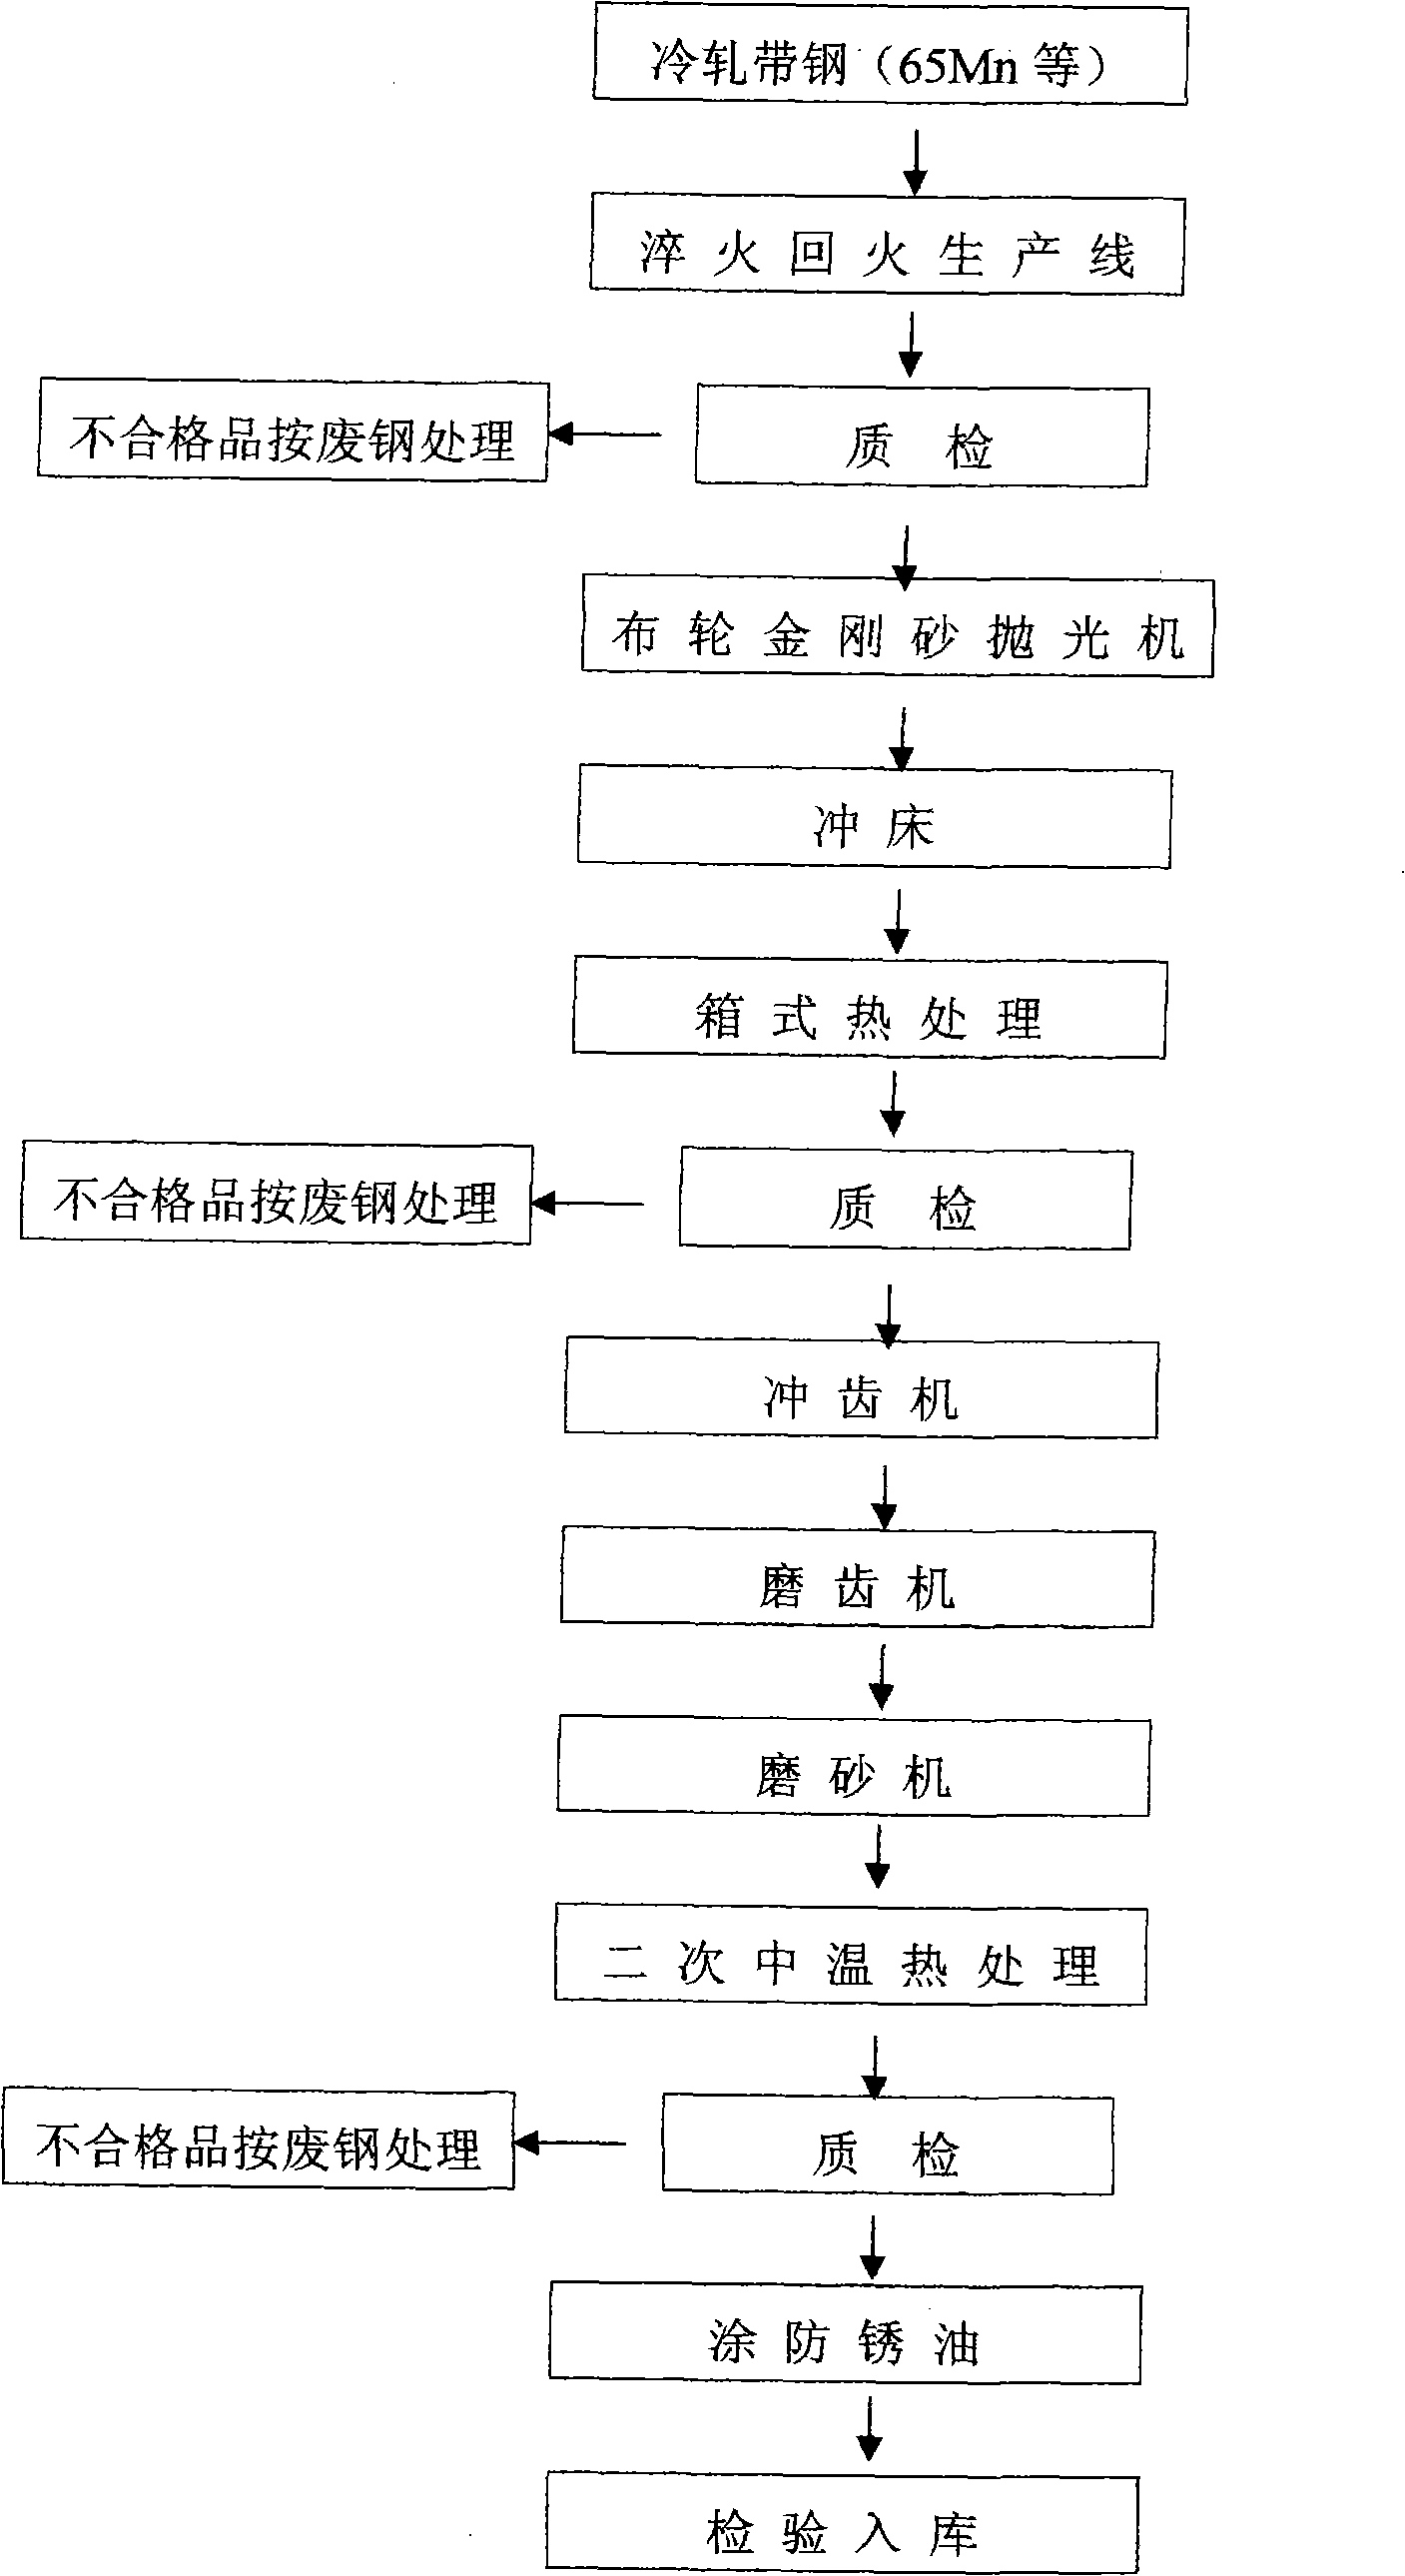 Method for producing traceless quenching and embossing saw blade